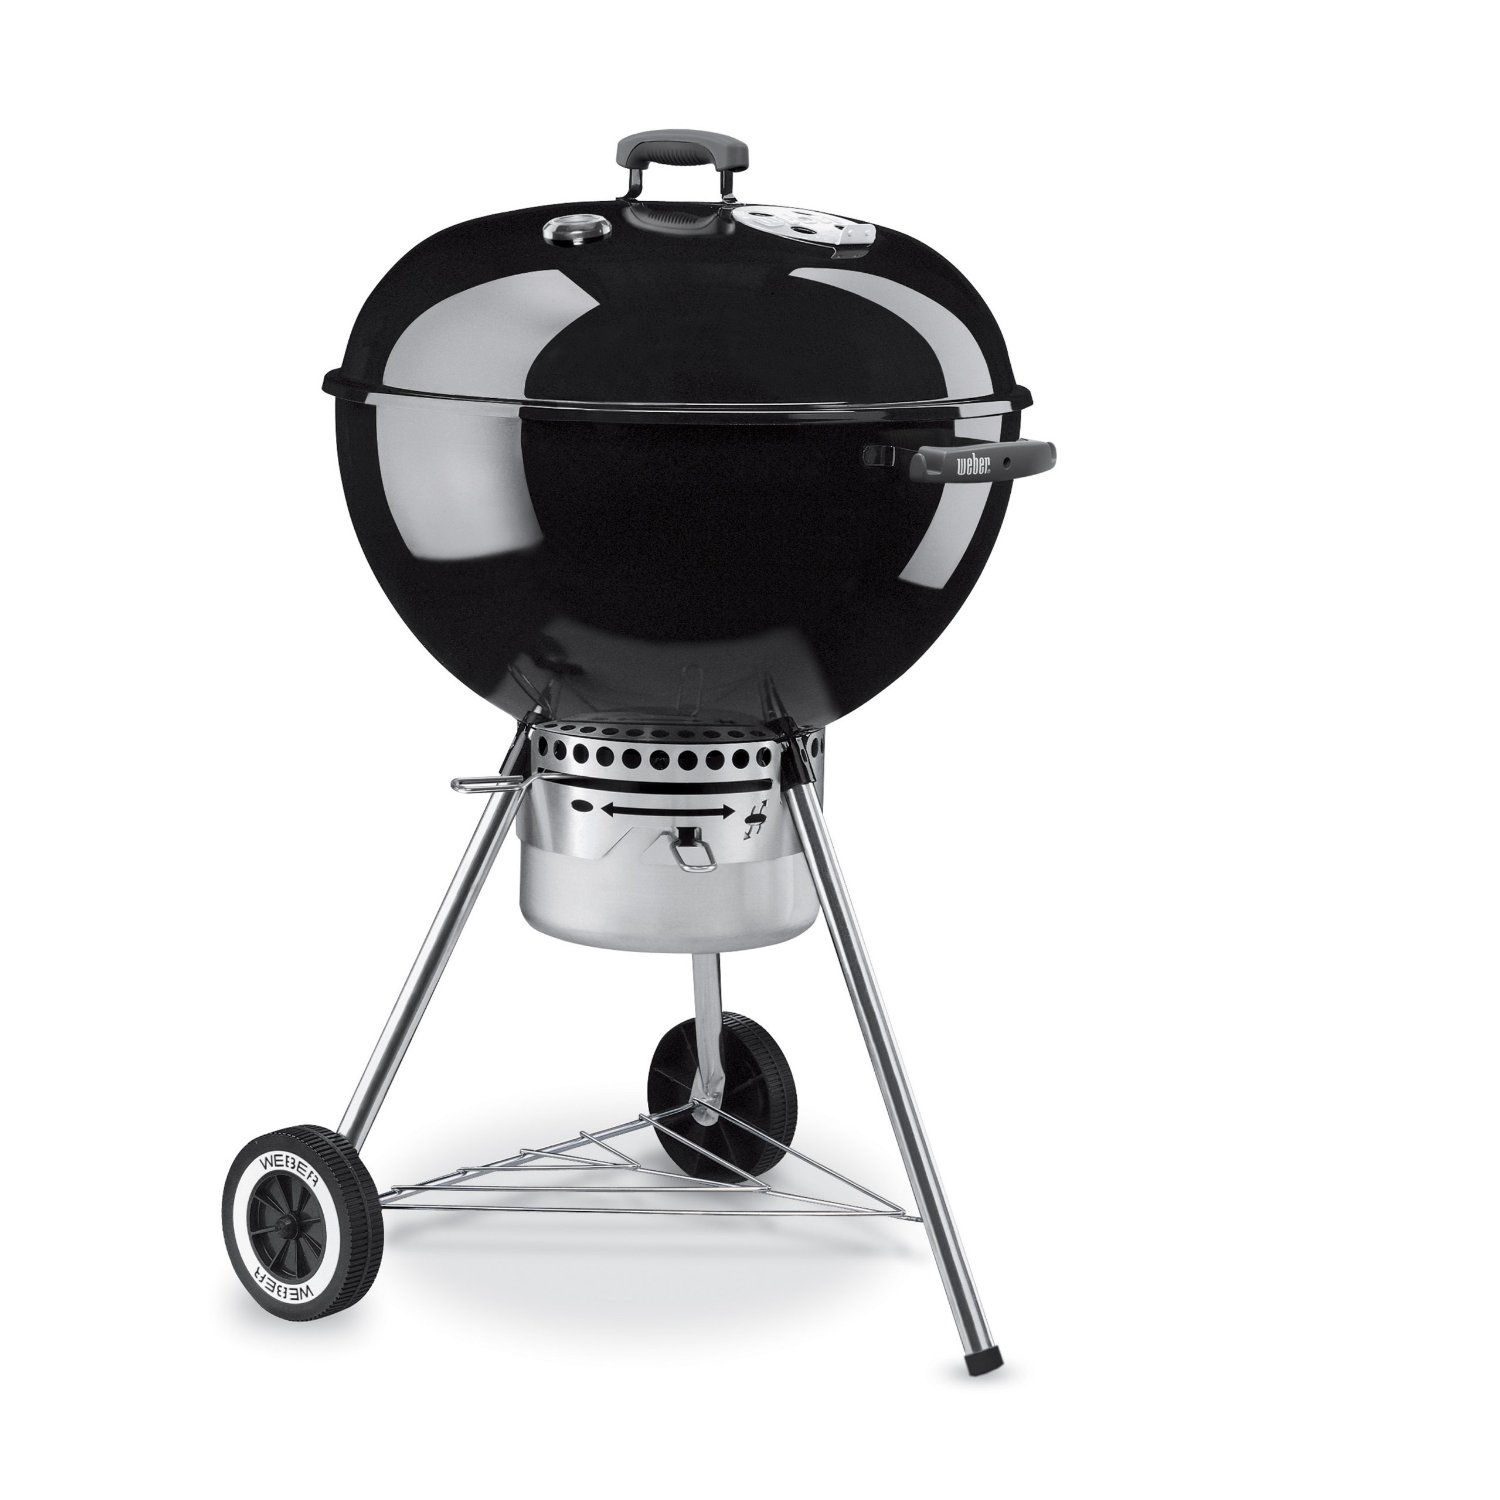 Free PNG Grill - 47963